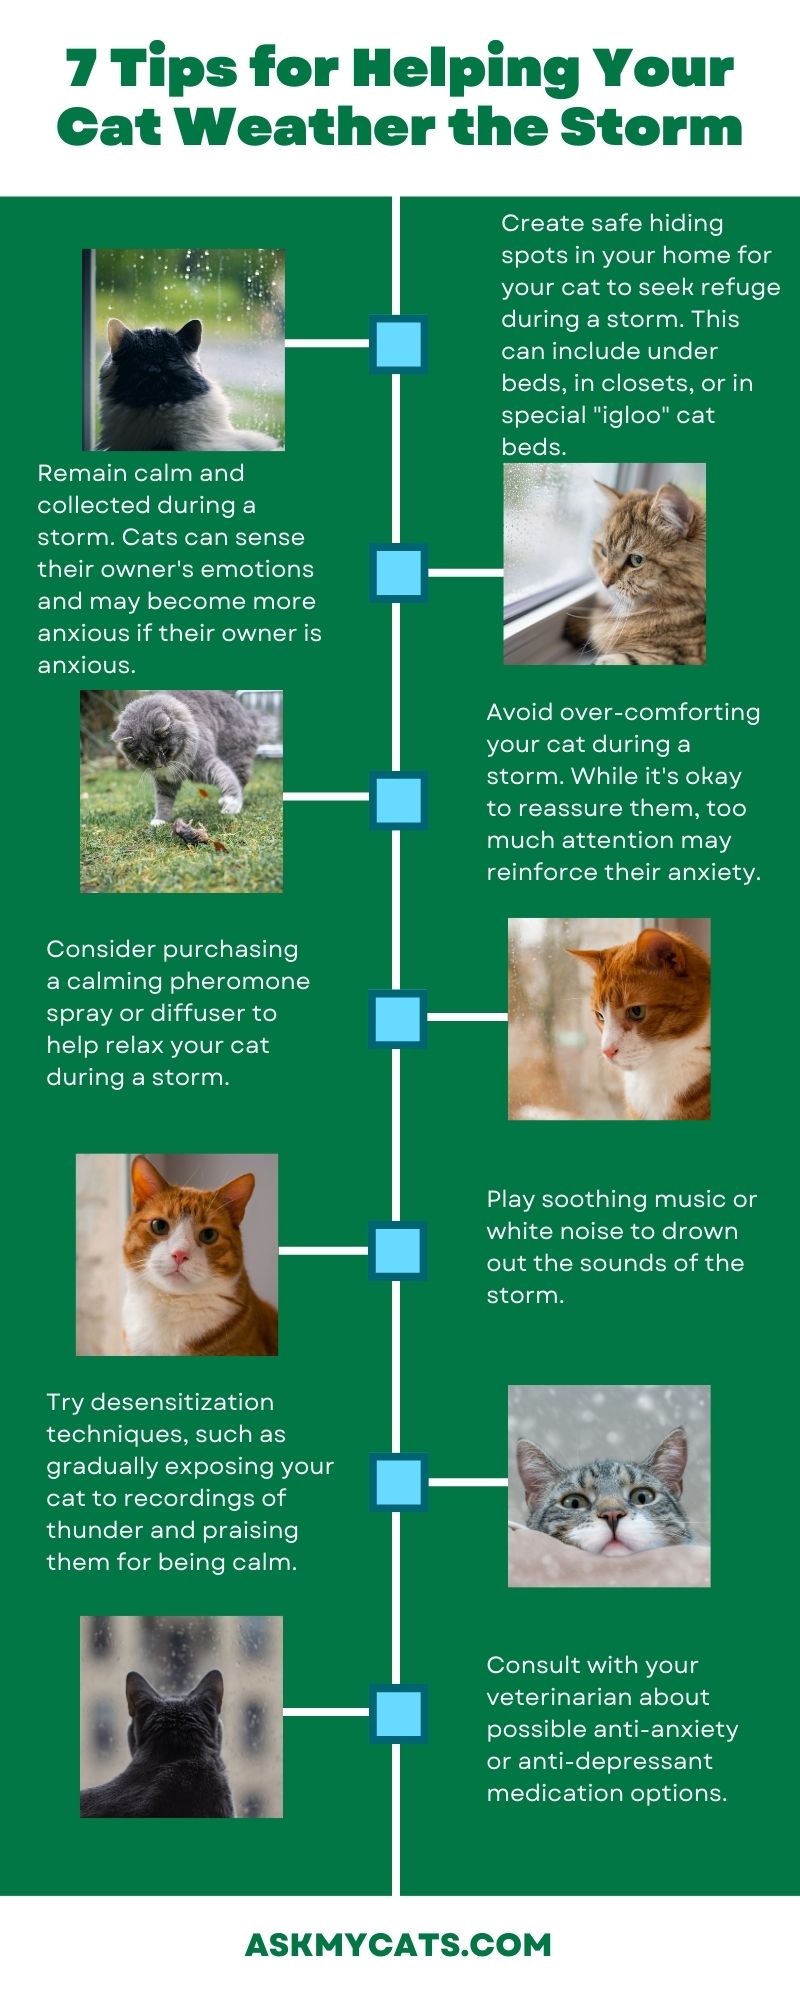 7 Tips for Helping Your Cat Weather the Storm (Infographic)